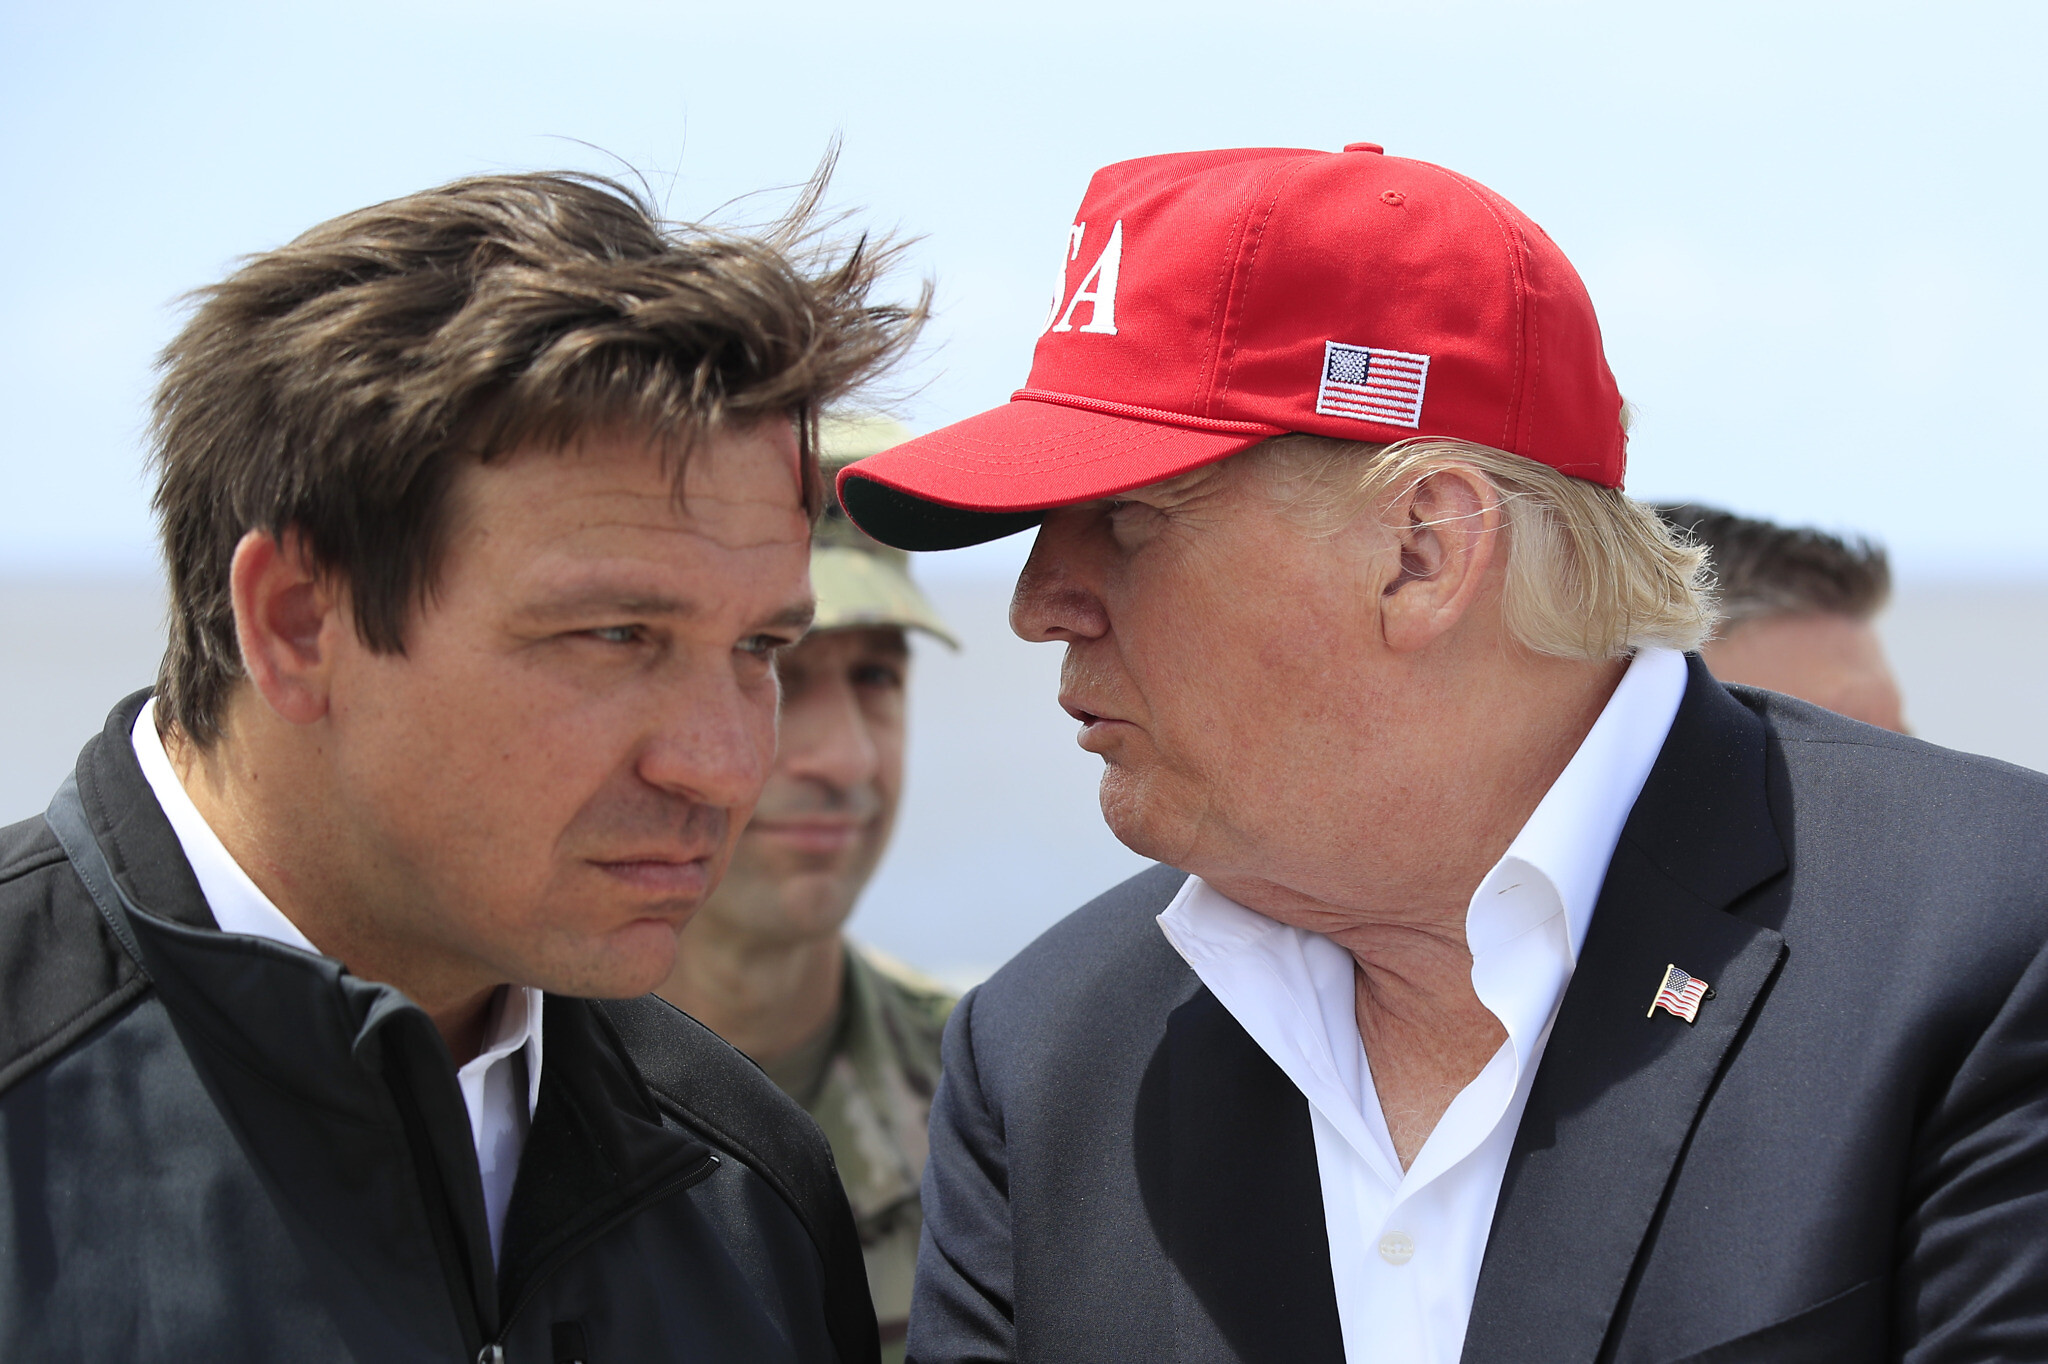 Trump vs. DeSantis A simmering rivalry bursts into view The Times of